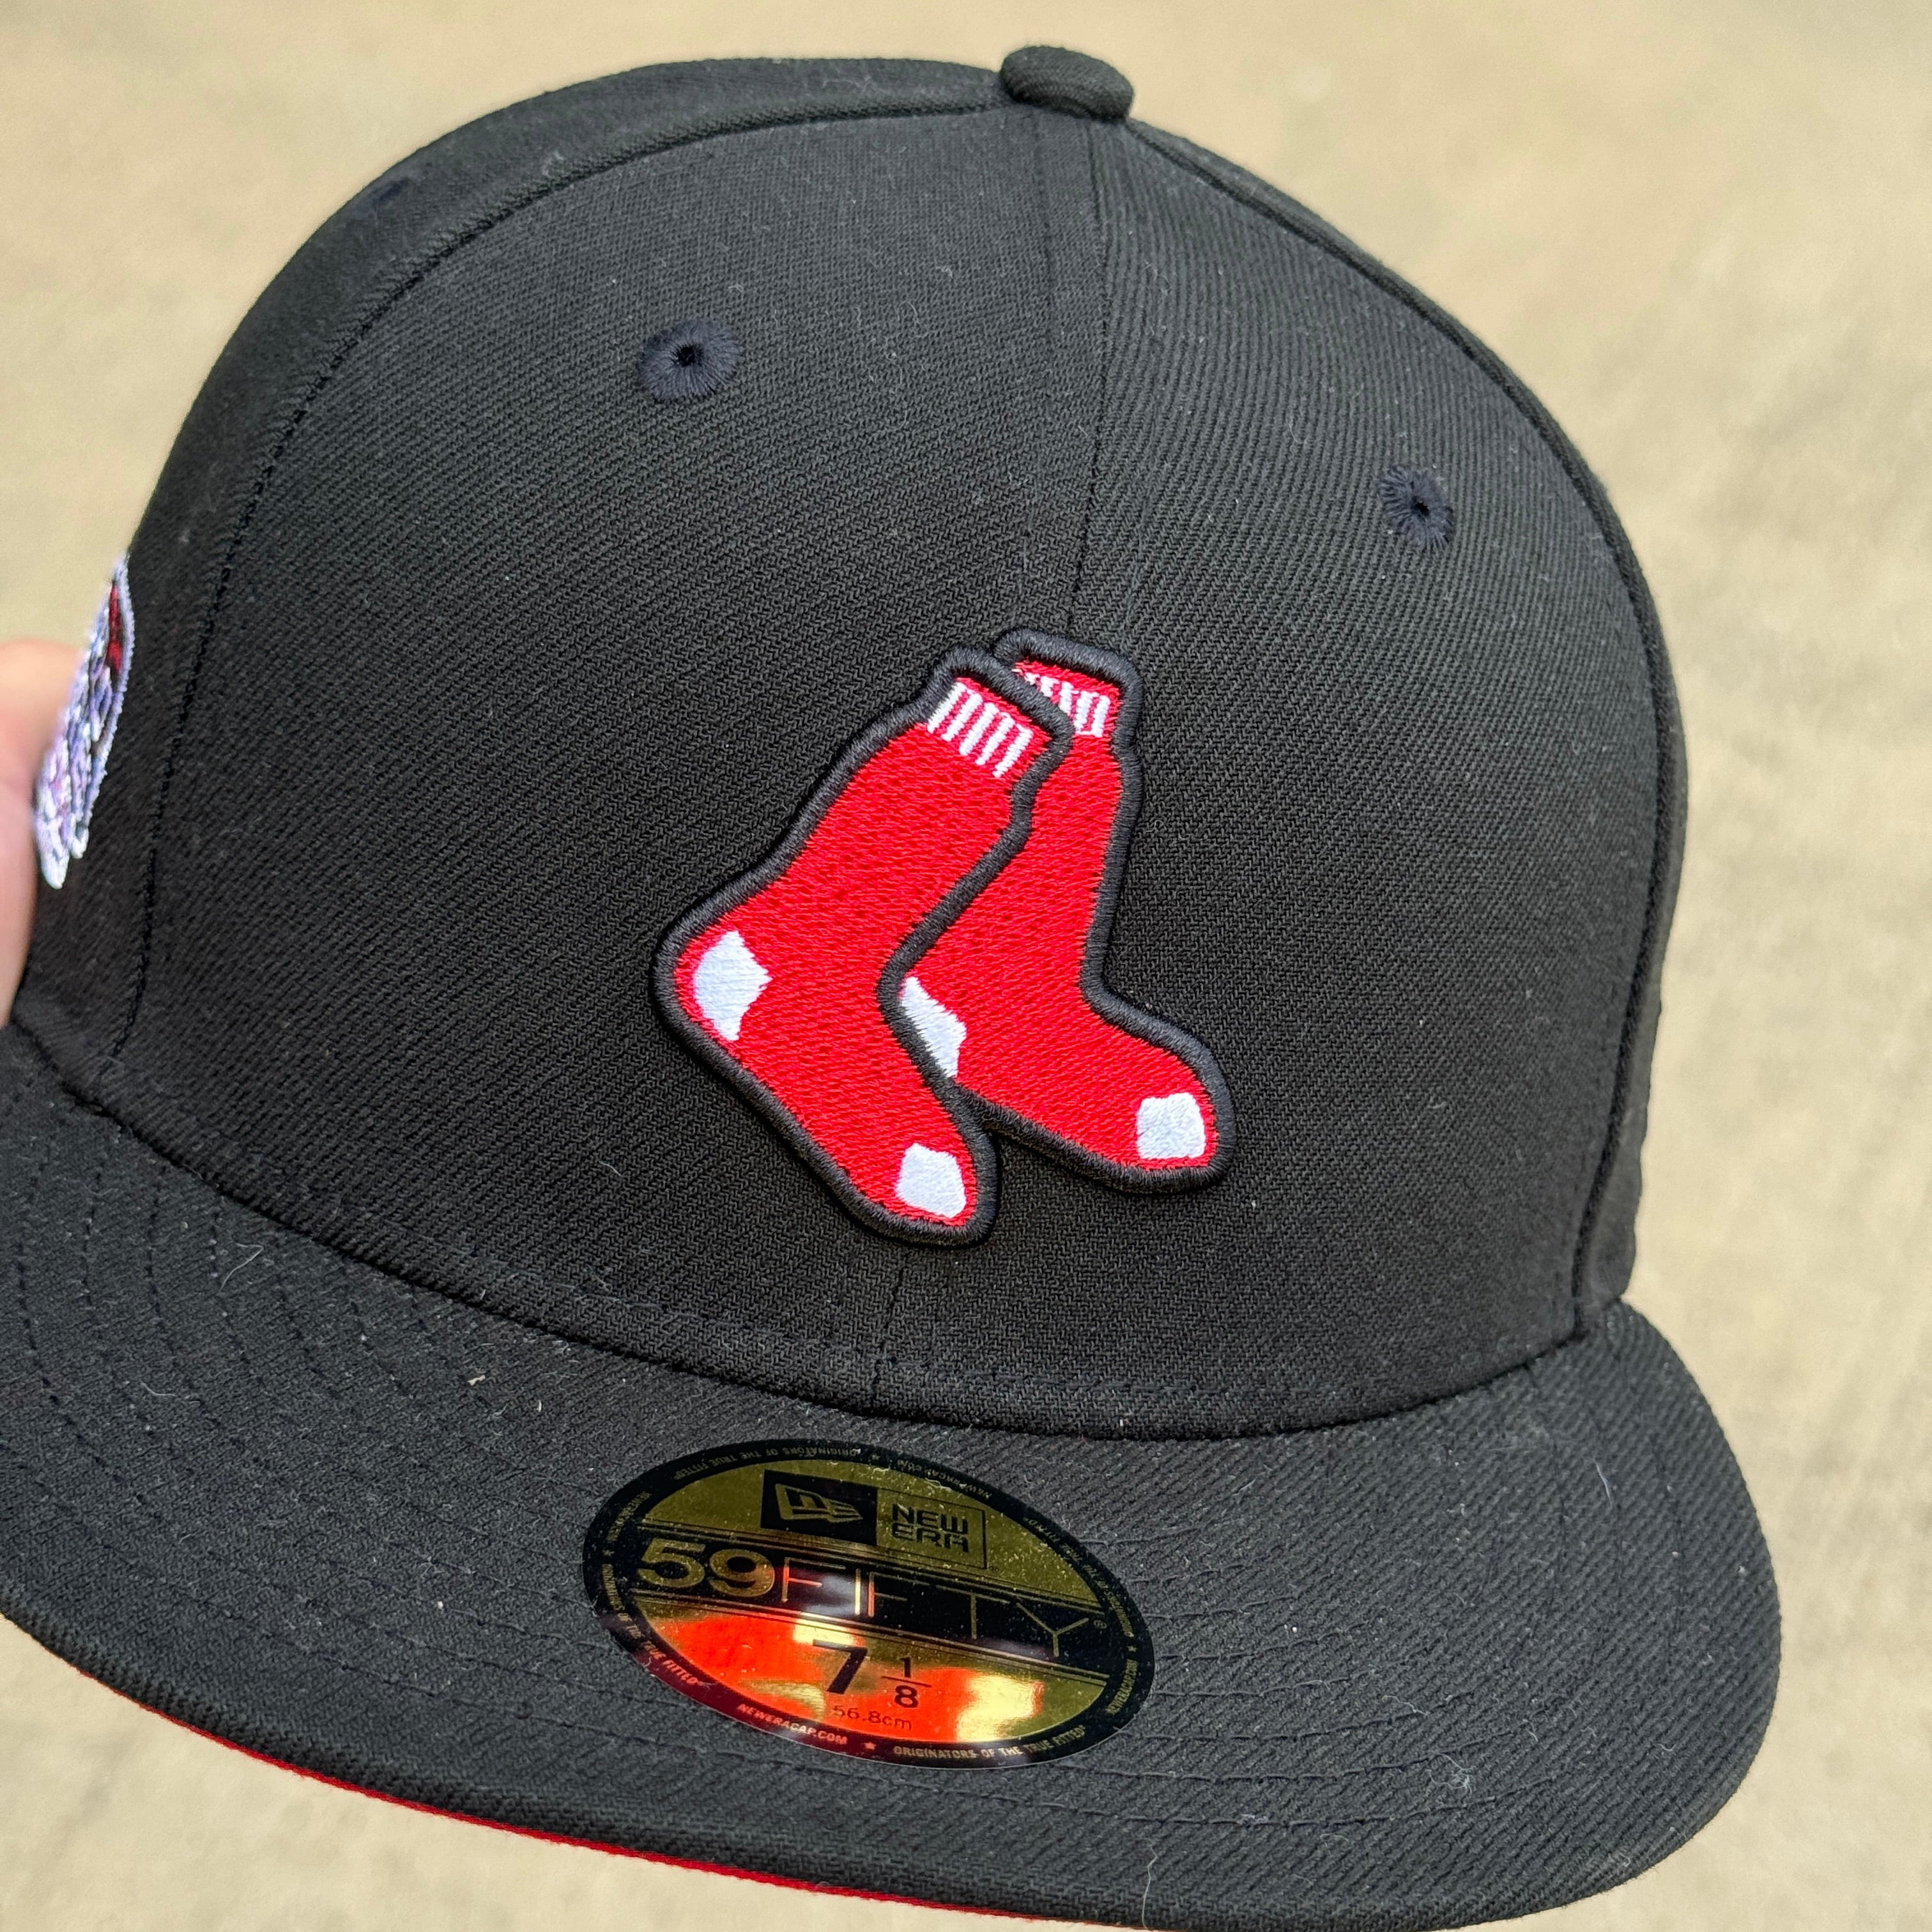 NEW 7 1/8 Black Boston Red Sox World Series 2004 59FIFTY New Era Fitted Hat